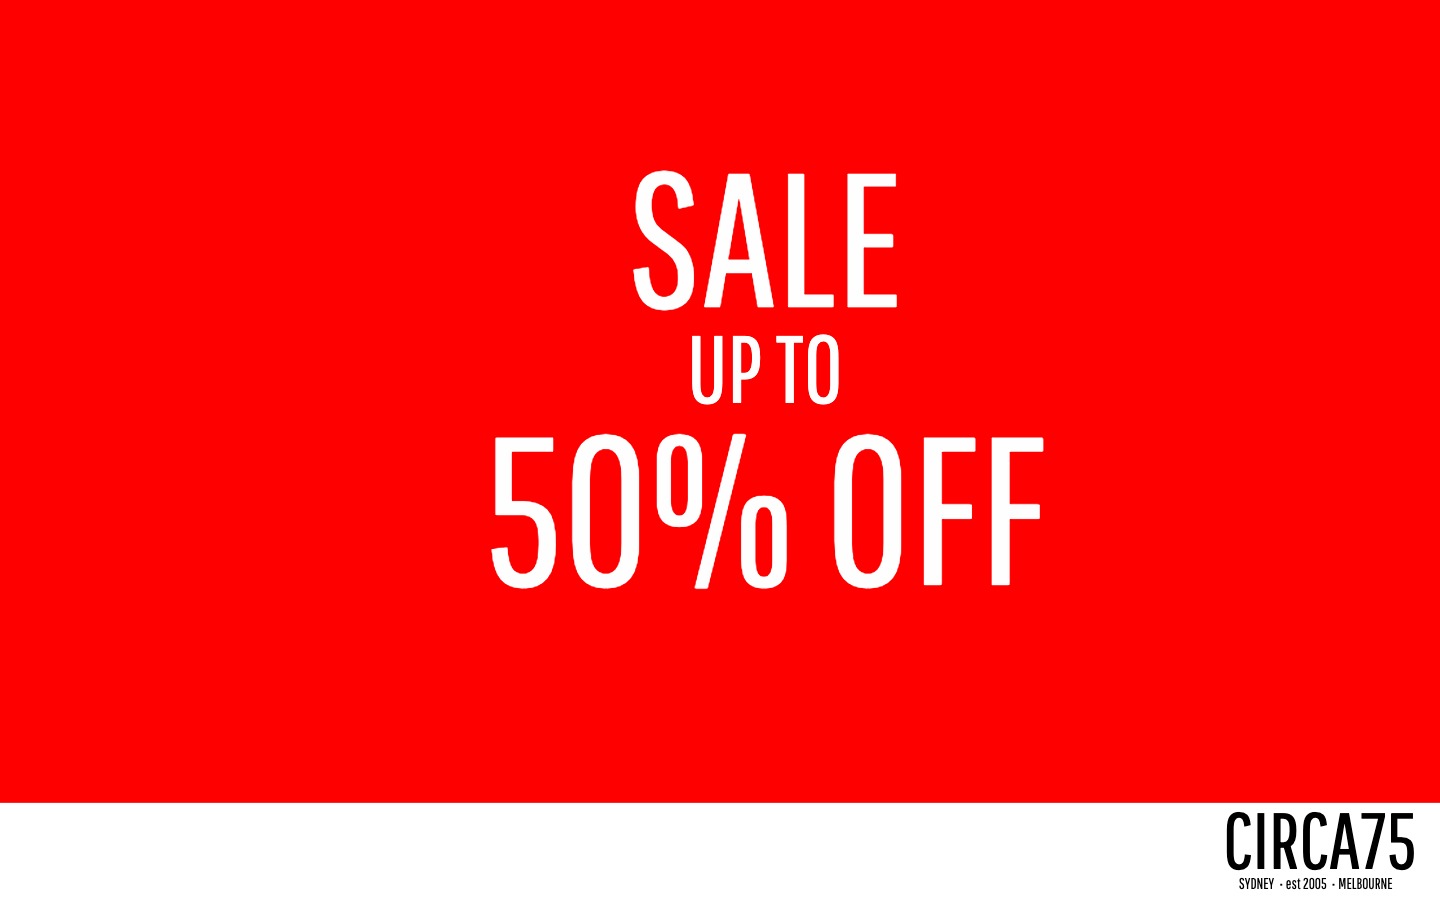 Up to 50% off mens chinos, jeans, shorts, swimwear, tshirts, shoes and more online at CIRCA75